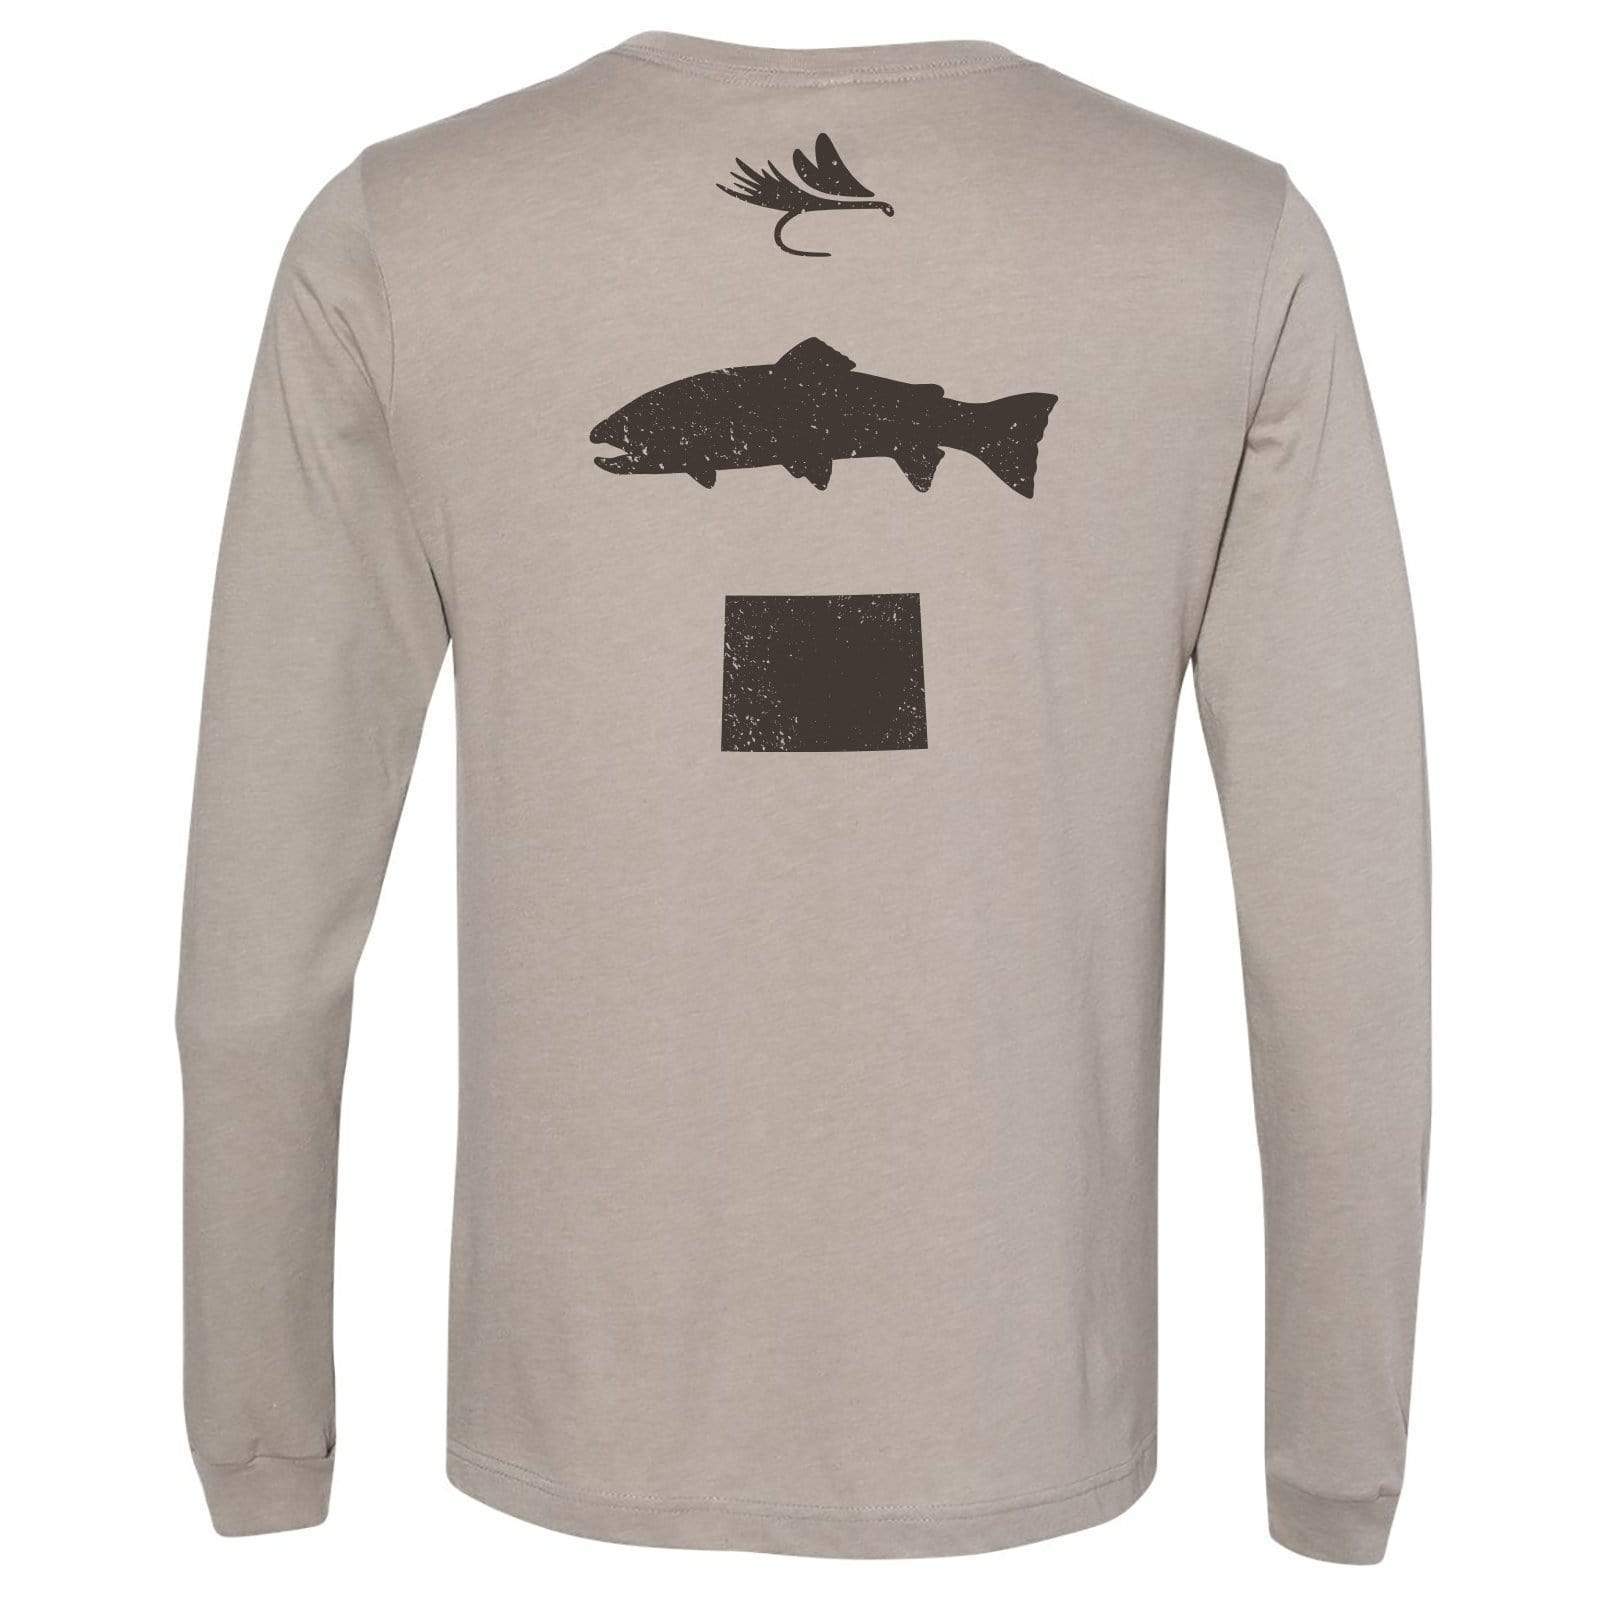 Fly Fish Wyoming Spine Design Long Sleeve - 2.0